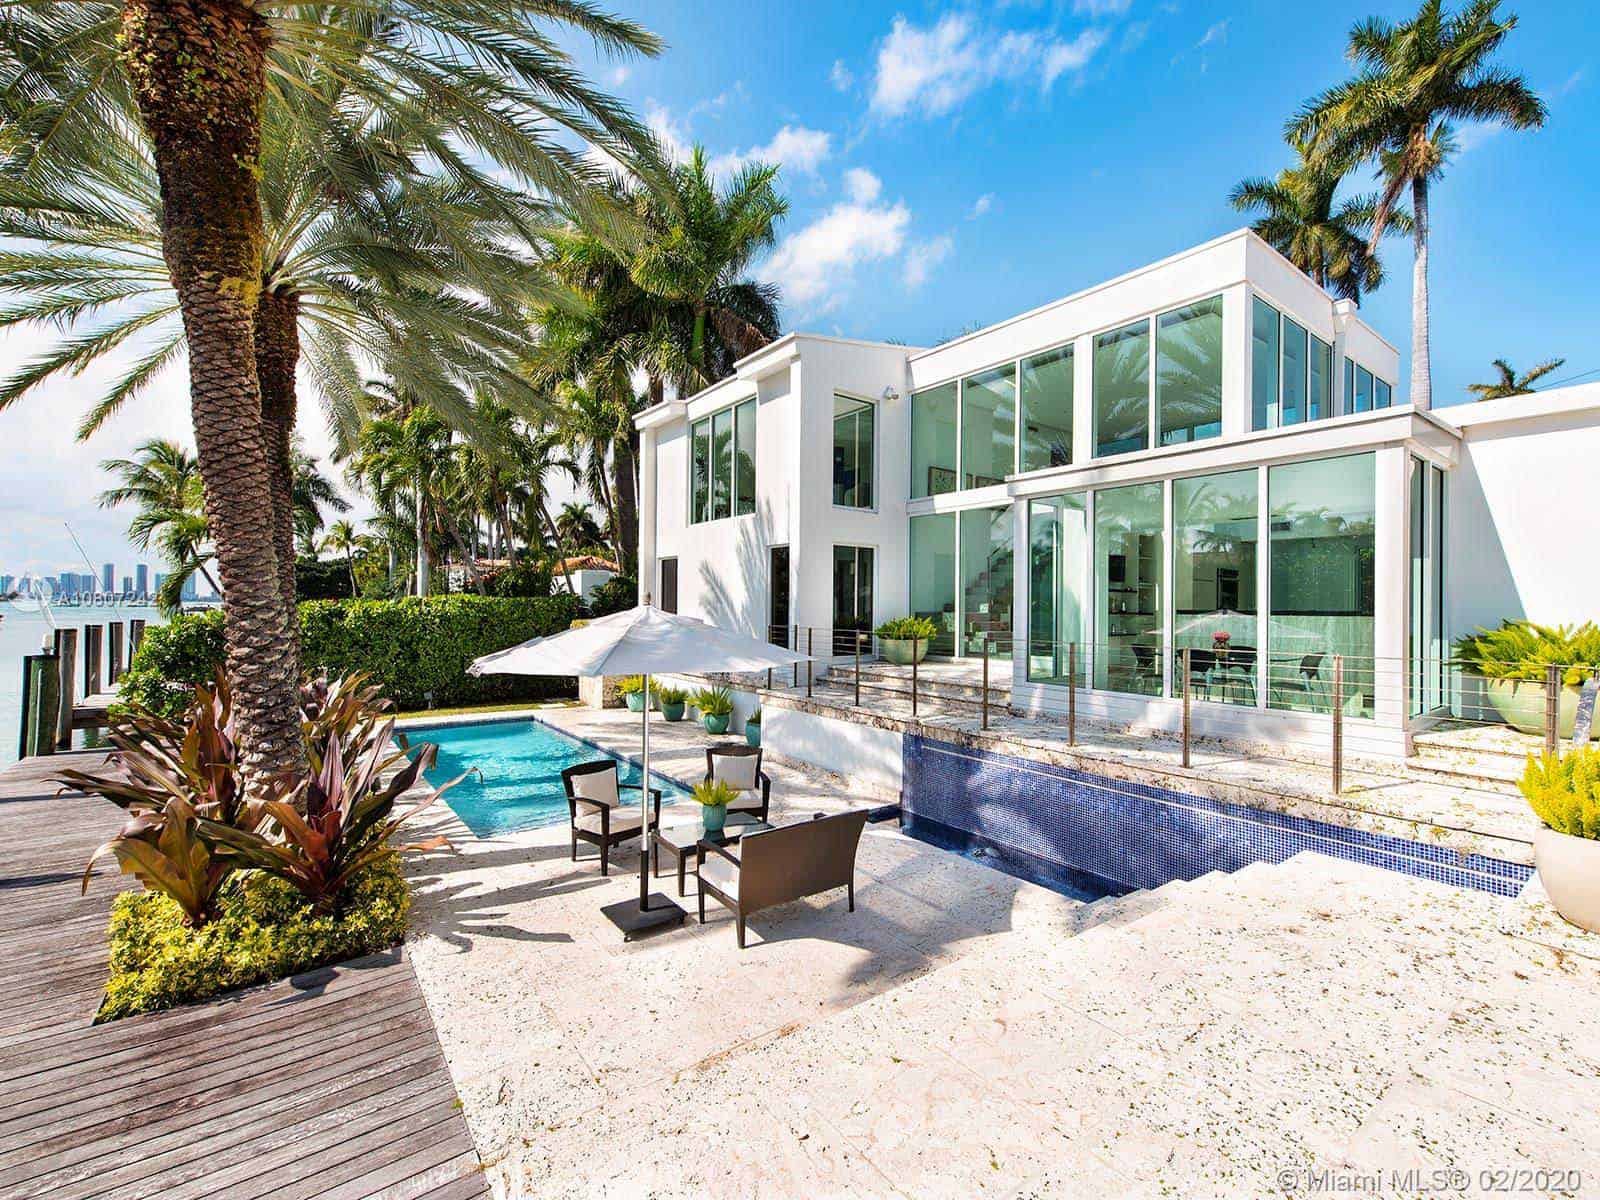 Ultra-Luxury Homes for Sale in Miami Beach: 2288 SUNSET DR, MIAMI BEACH, FL 33140